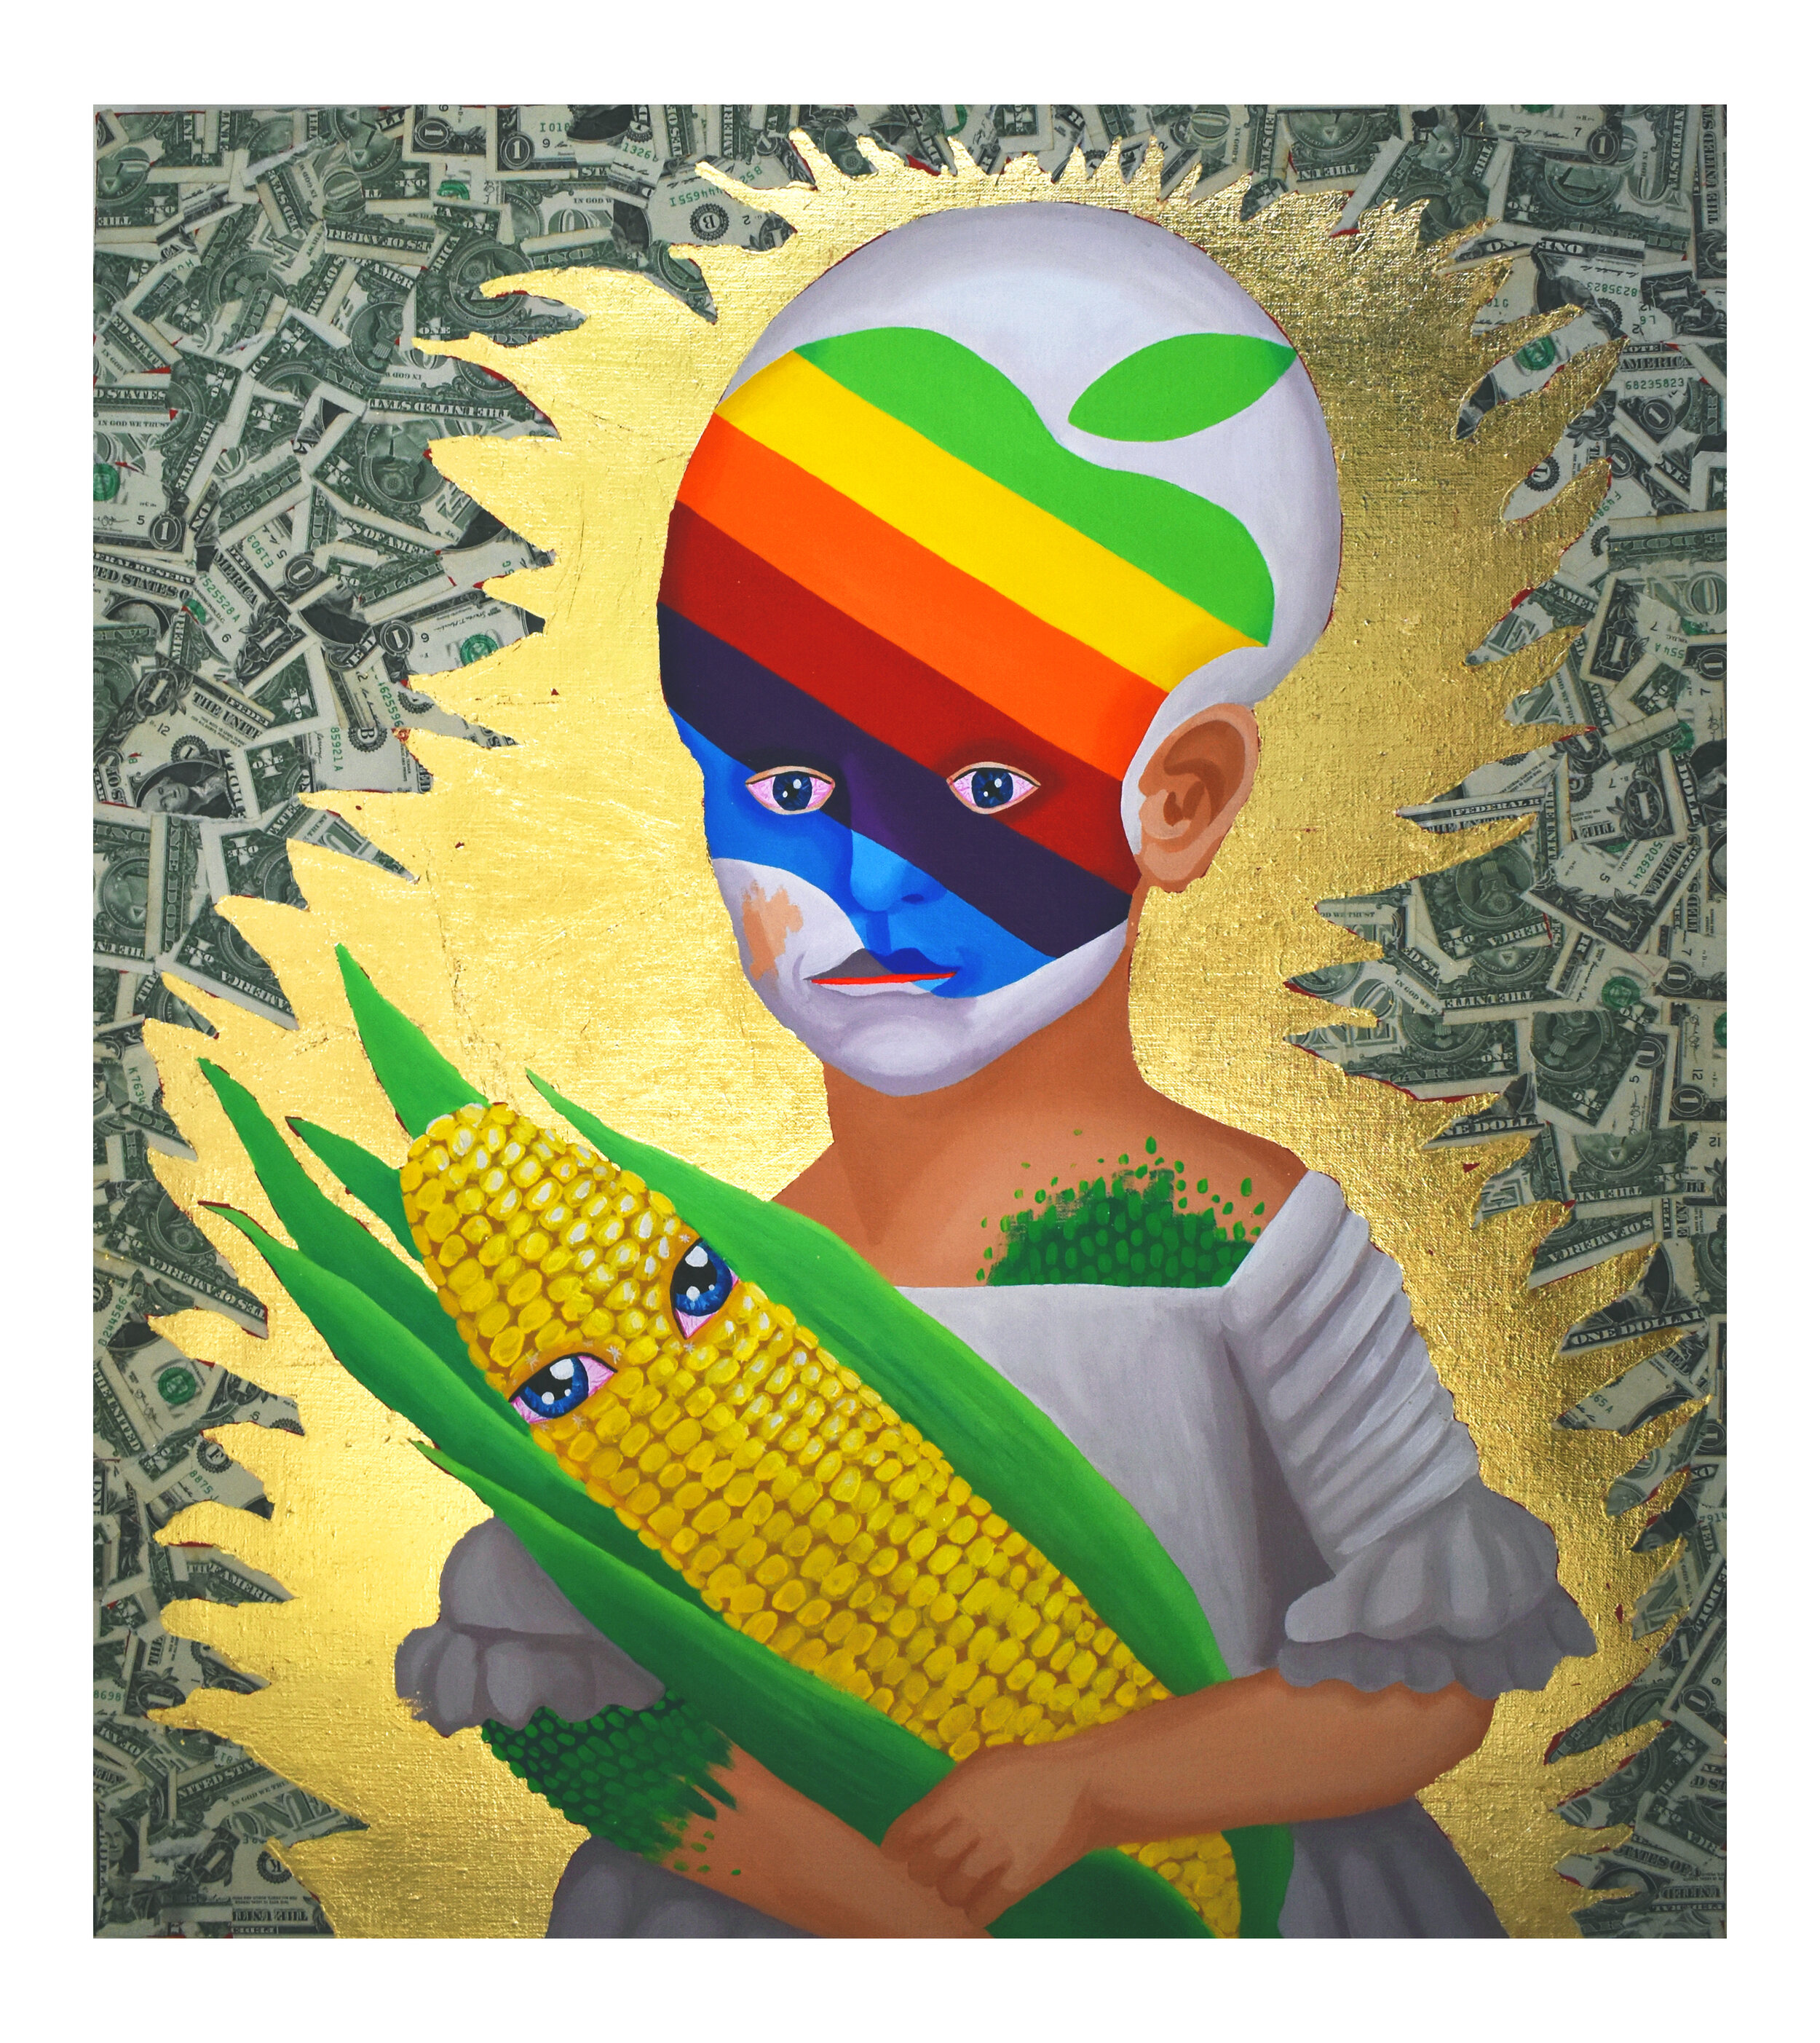   Retro Apple Boy with Sentient Corn , 2019  30 x 26 x 1.5 inches (76.2 x 66.04 x 3.81 cm.)  Acrylic, gold leaf, and American dollar bills on on linen  Private collection 